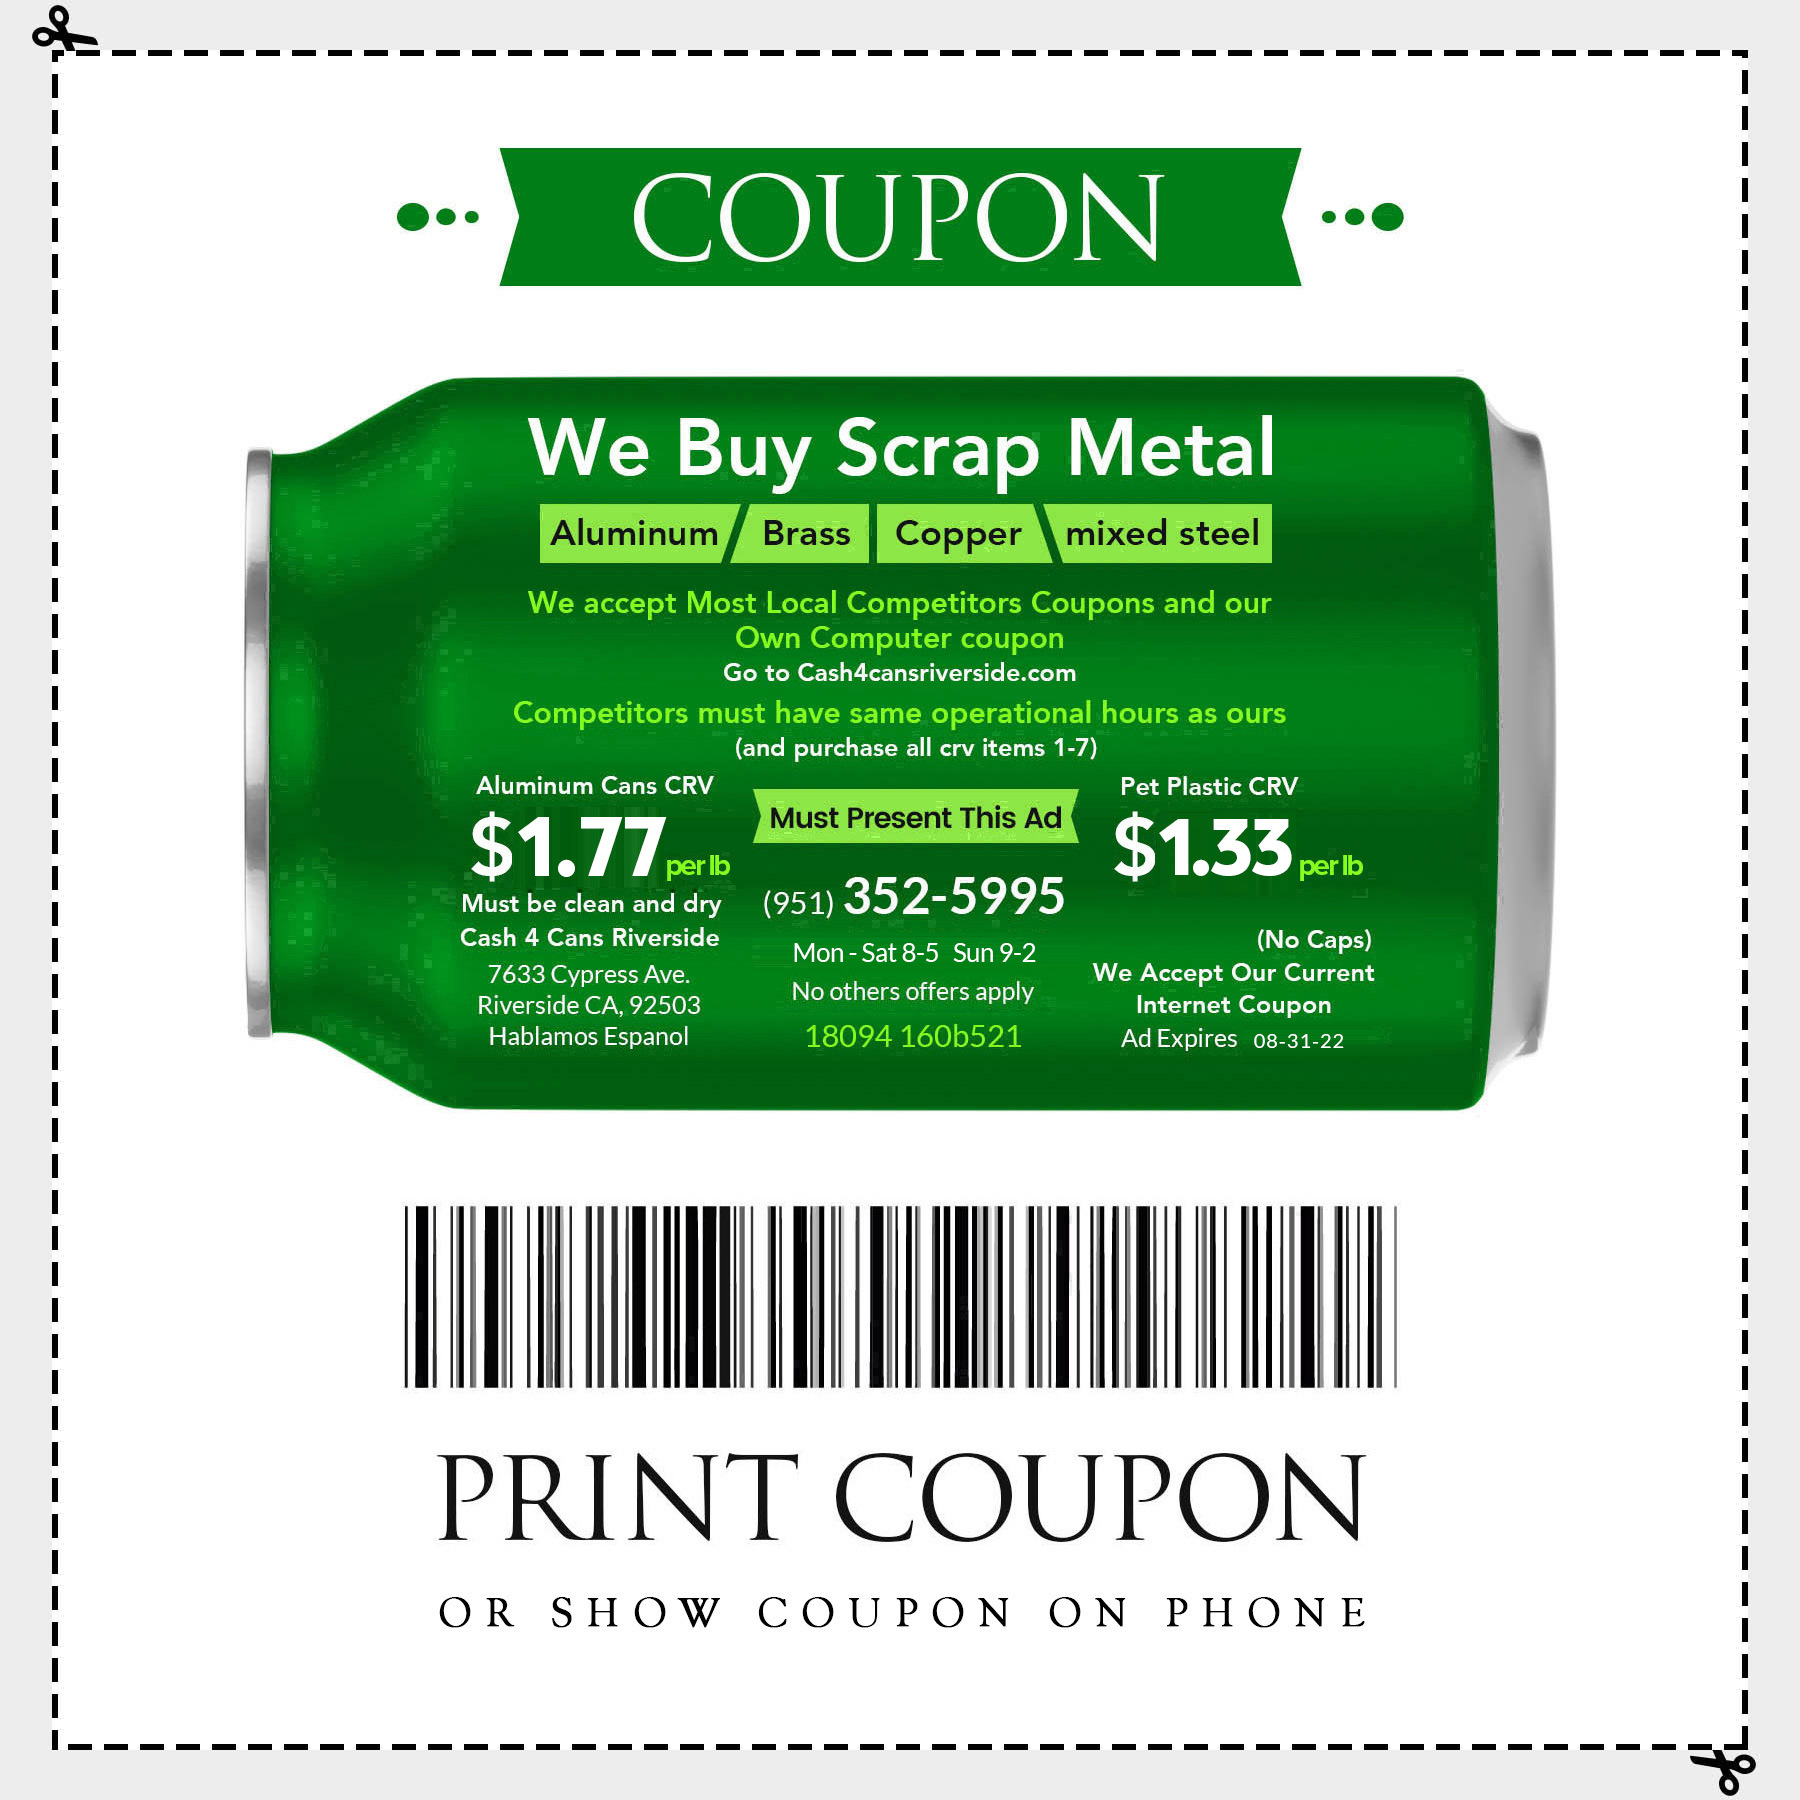 We buy scrap metal Aluminum, Brass, Copper, Mixed steel. We accept most local competitors coupons and our own computer coupon. Competitors must have same operational hours as ours (and purchase all crv items 1-7). One Must present this add. Aluminum Cans CRV $1.77 per lb and Pet Plastic CRV $1.33 per lb.